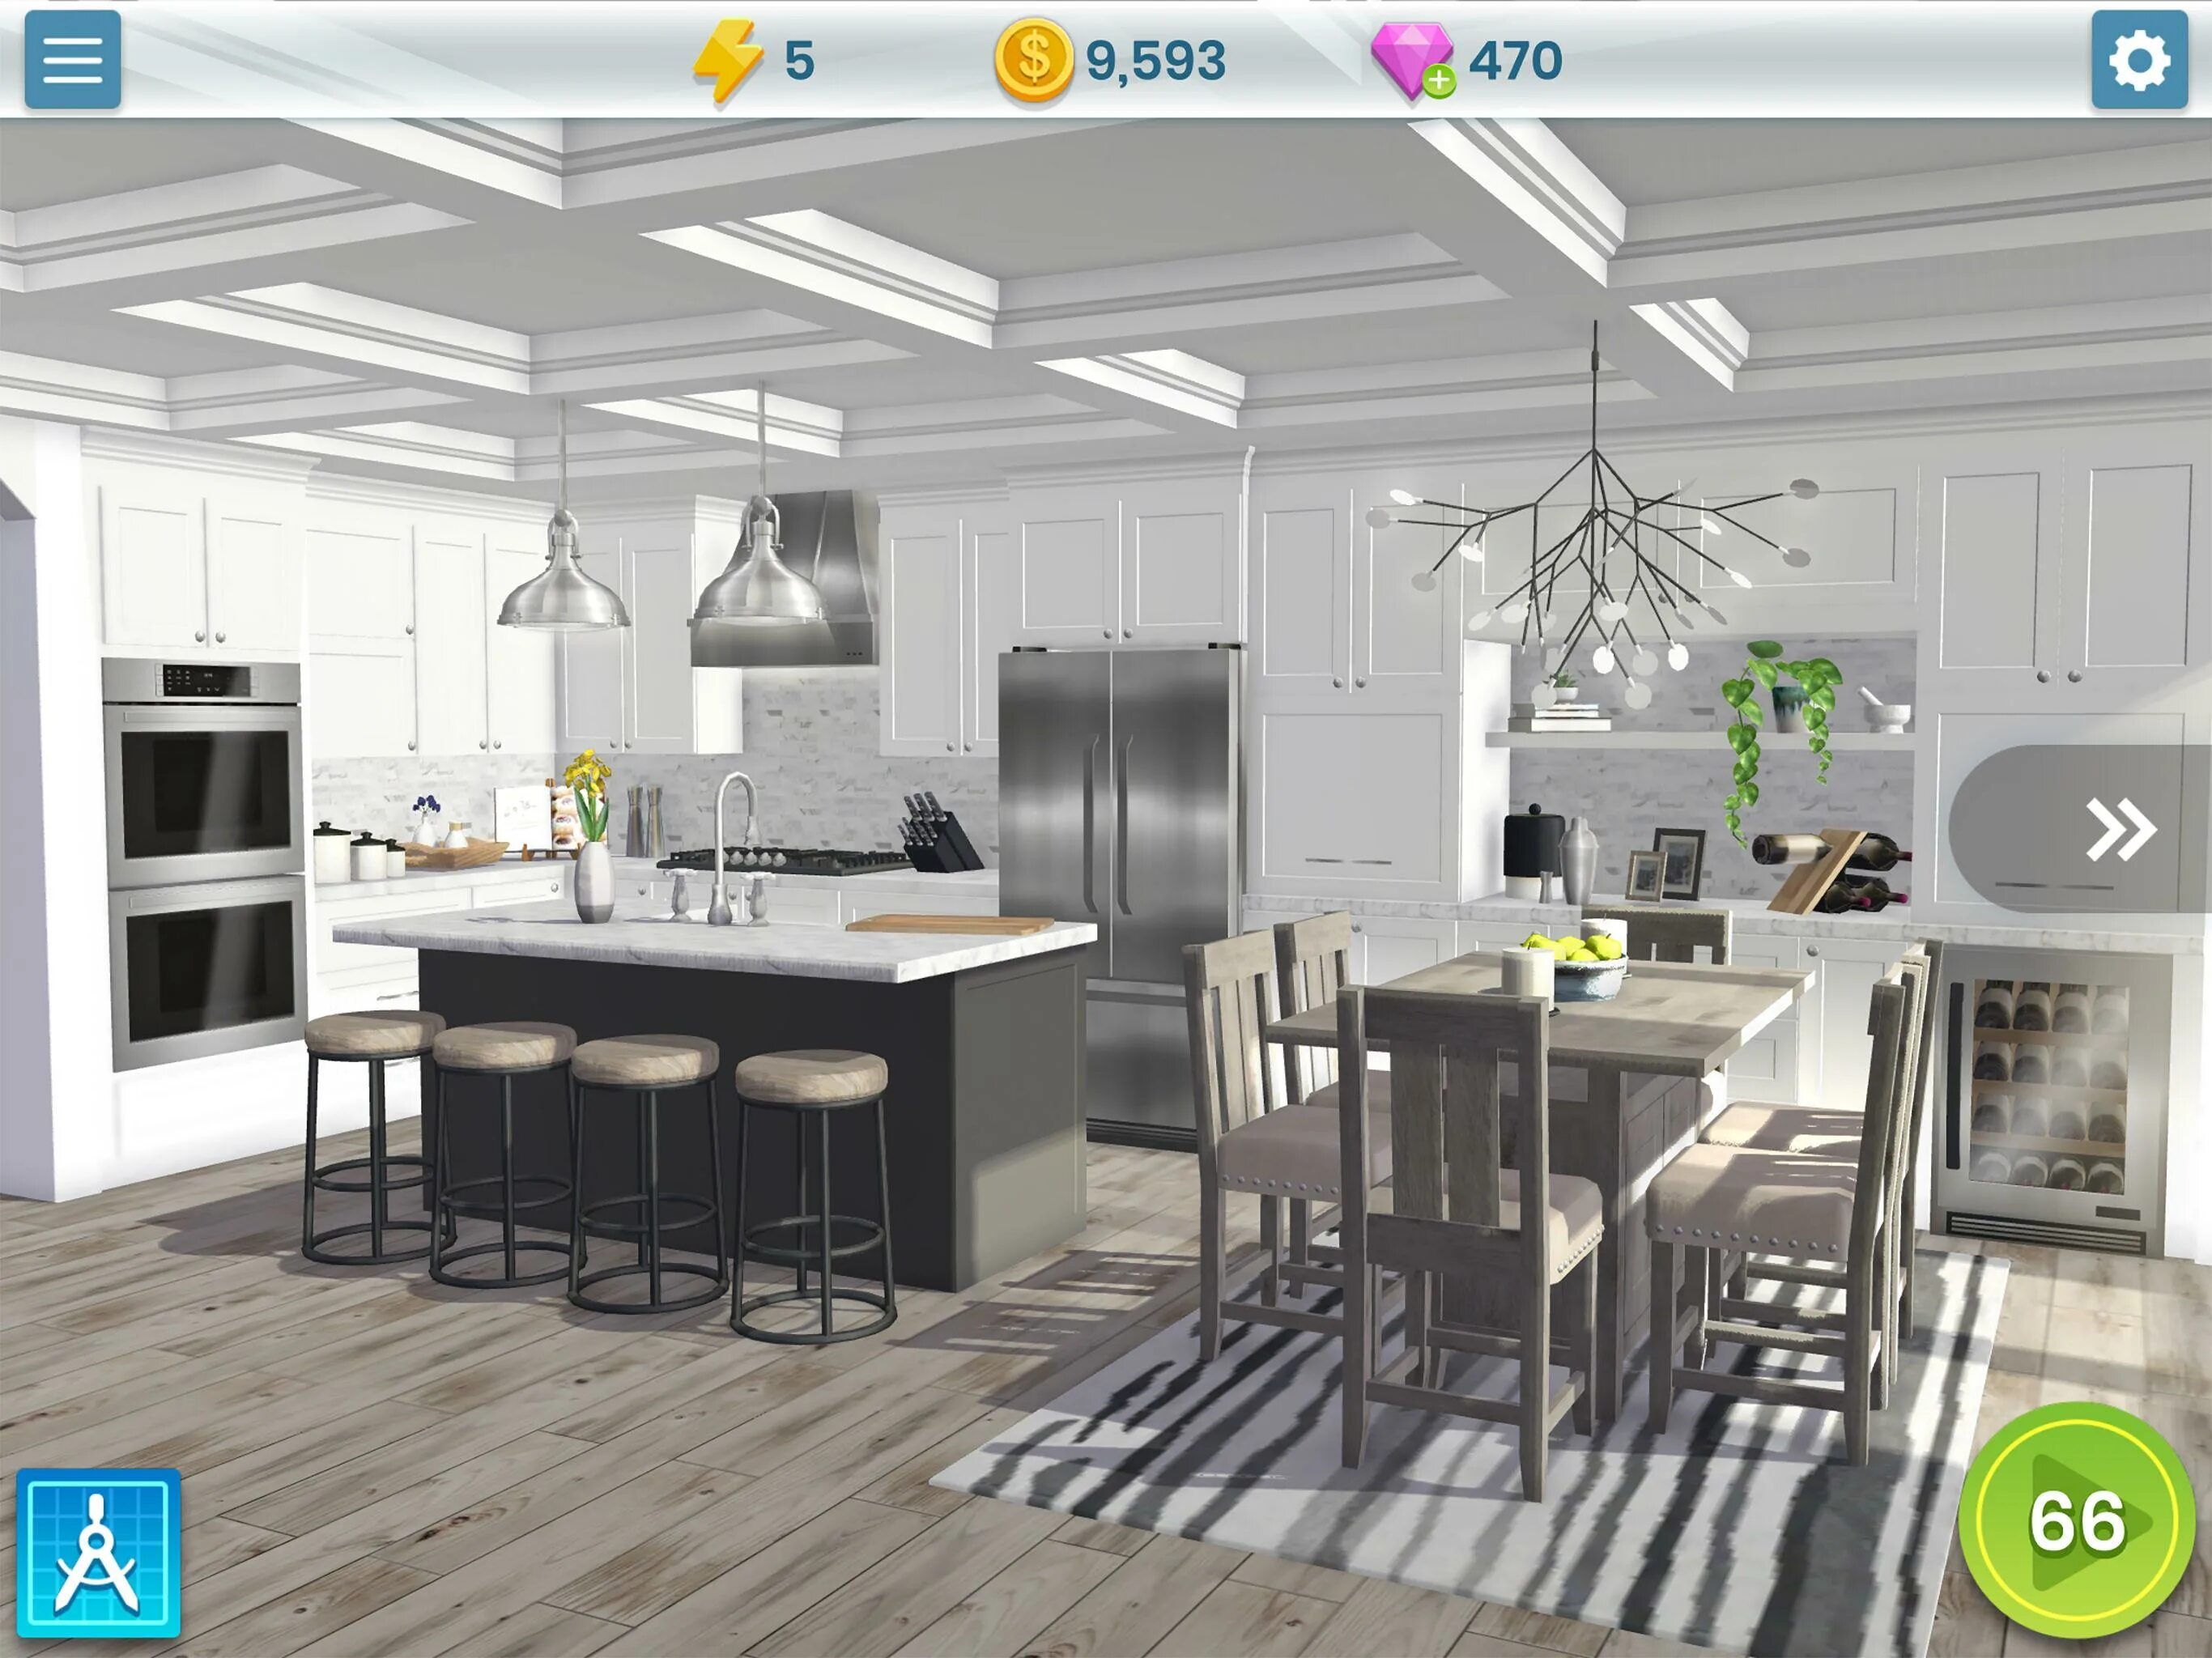 Property gaming. Property brothers игра. Property brothers игра первая комната. Property brothers Home Design. Home Design Makeover! V 4.3.7g мод (много денег).